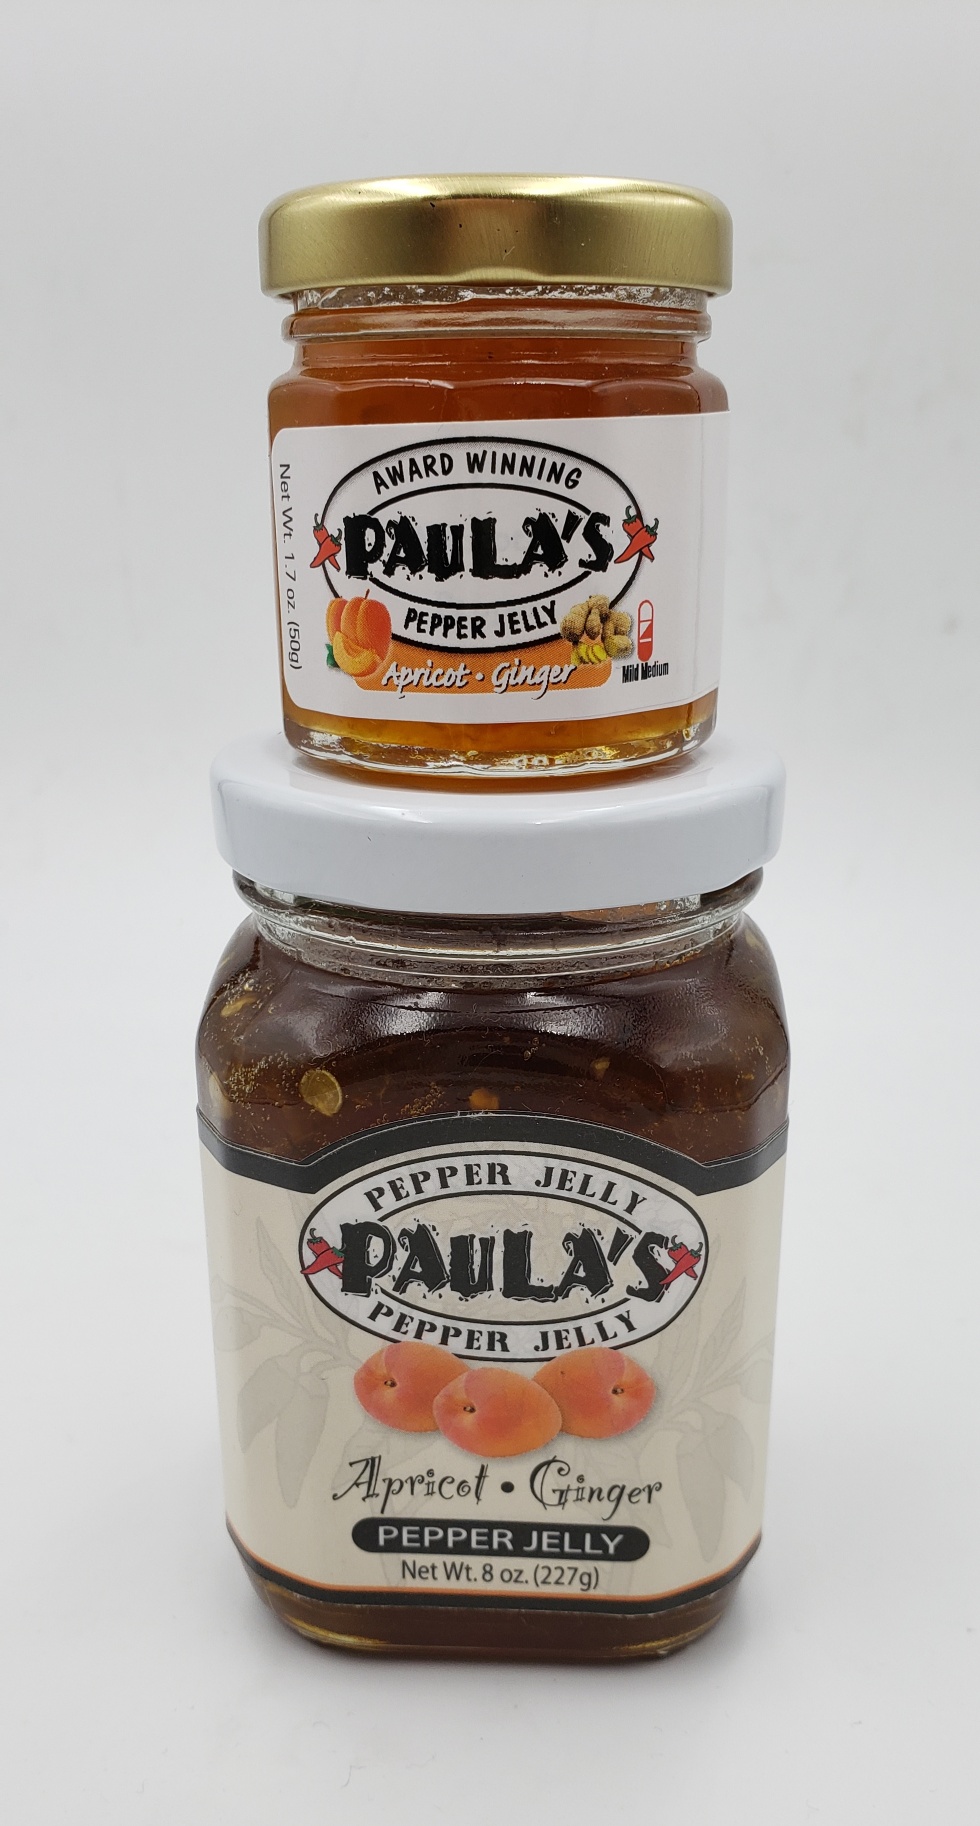 The 1.7 oz. pepper jelly jar on top of the 8 oz. pepper jelly jar from Paula’s Pepper Jelly.